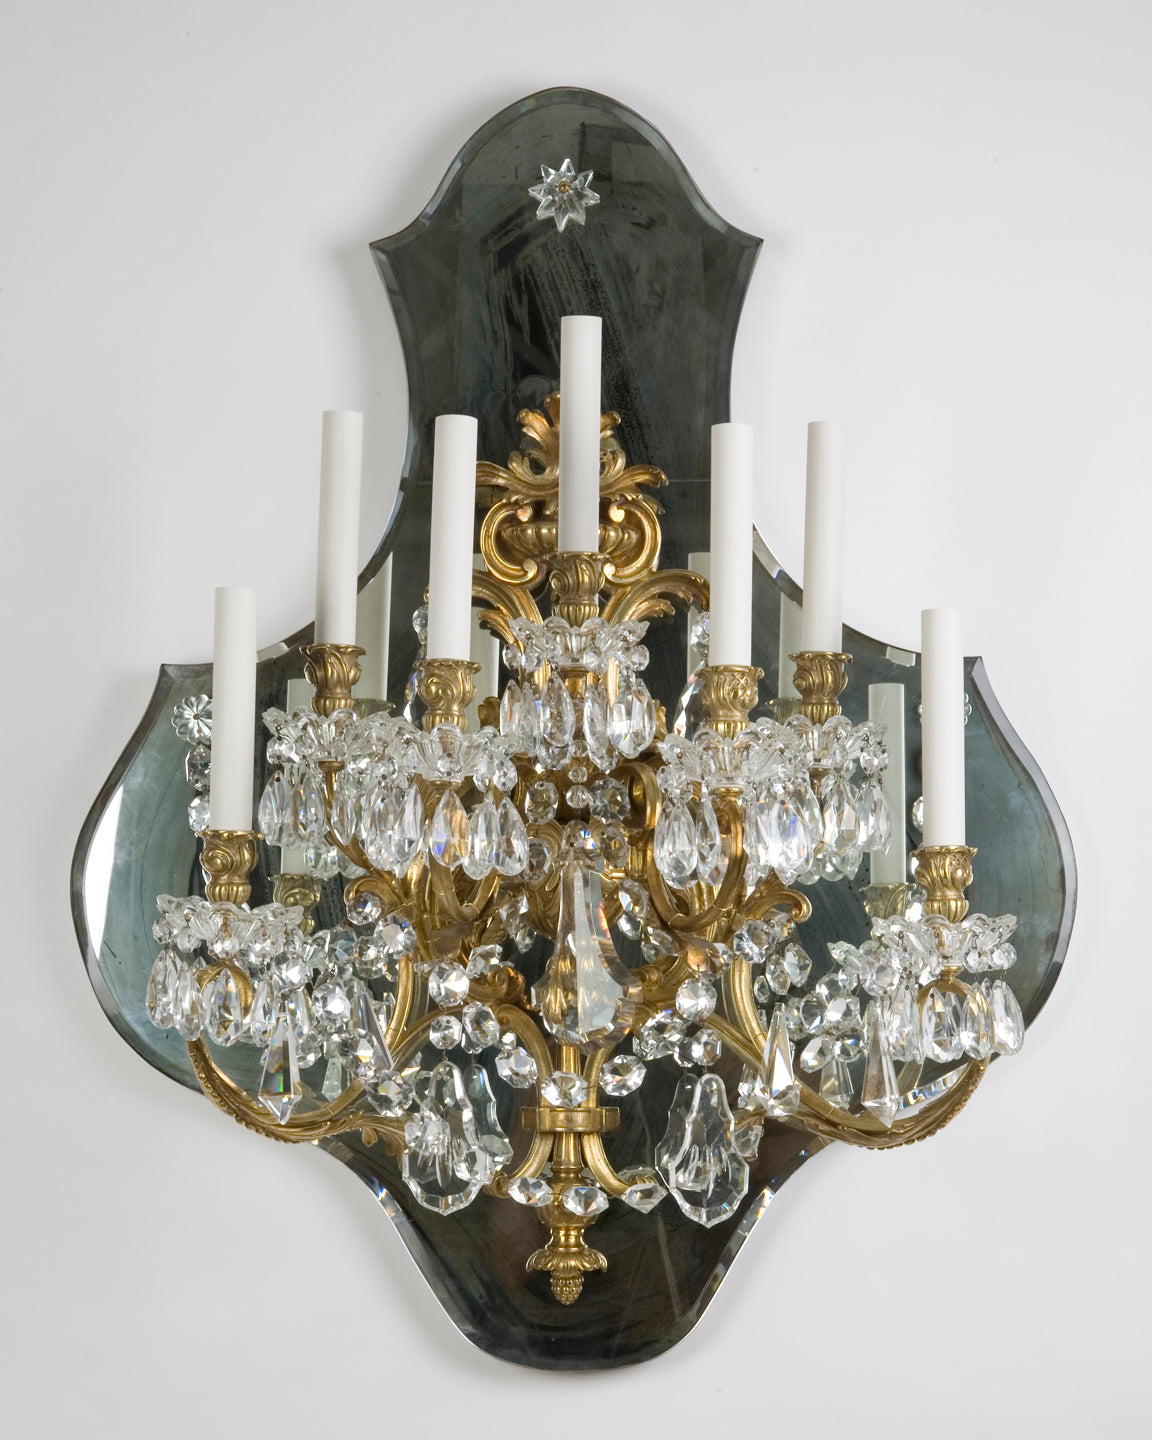 Mirrorback Sconces with Crystal Bobeches and Prisms